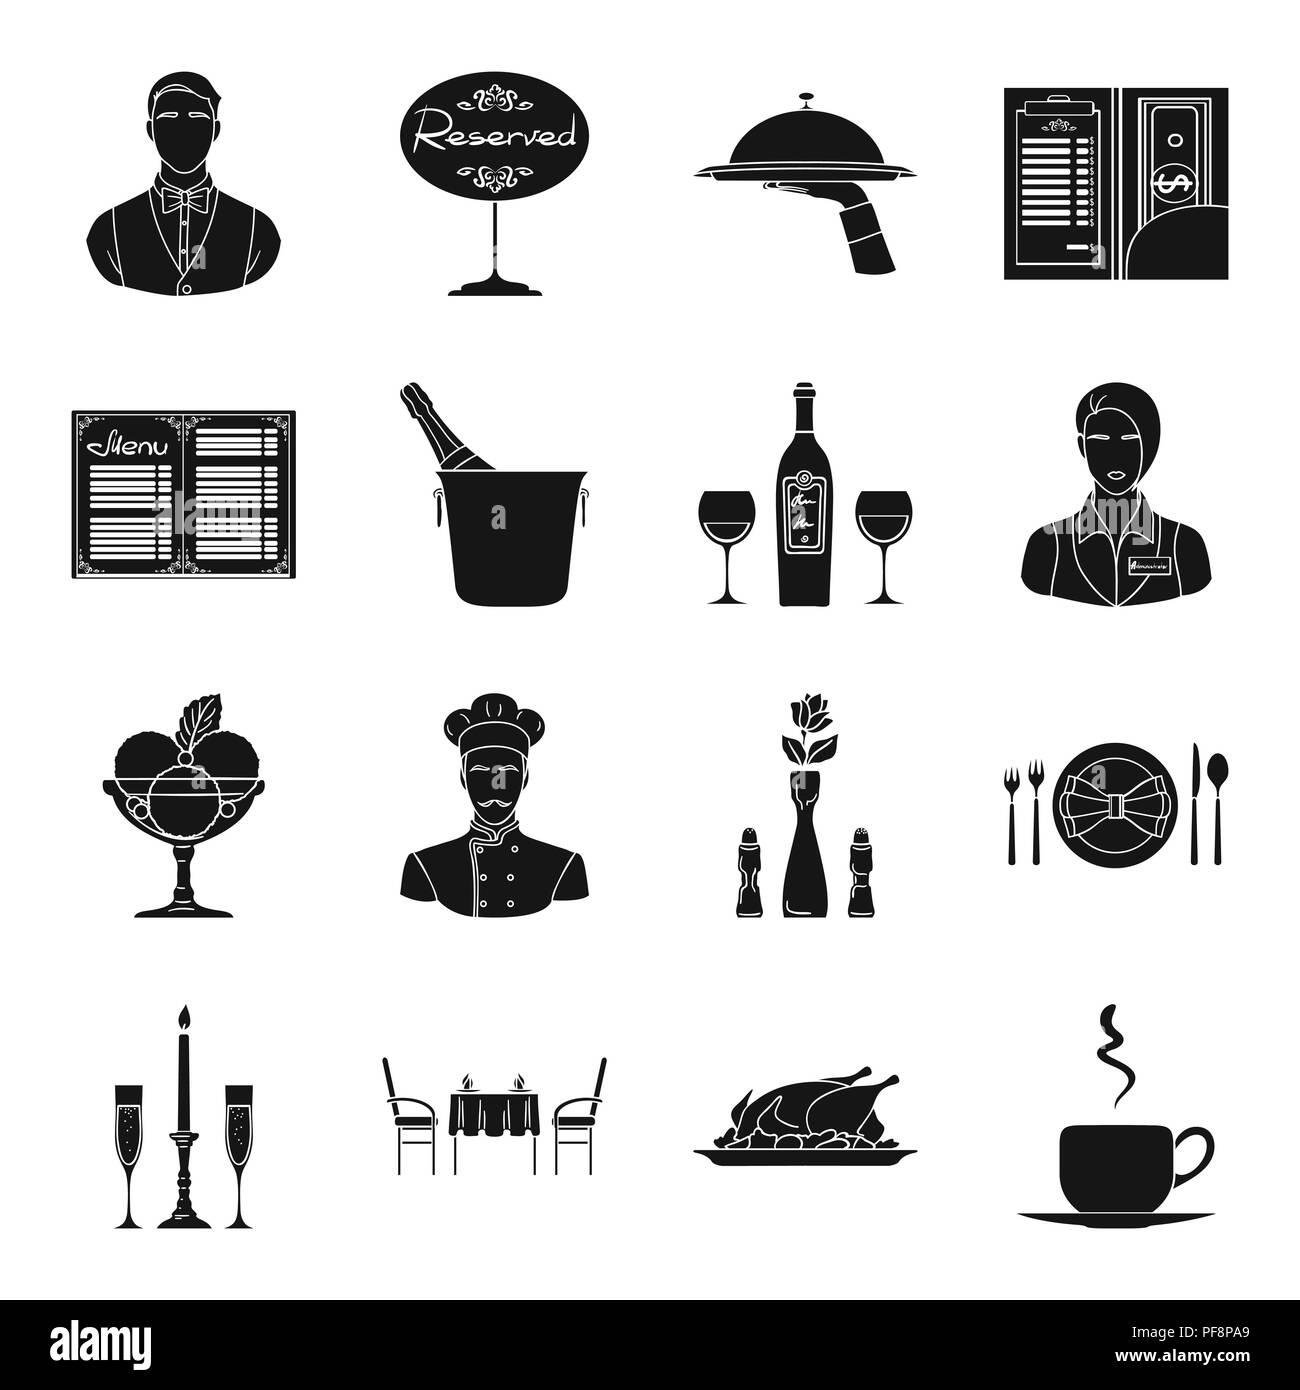 alcohol,black,bottle,bow,bowl,bucket,candle,cash,champagne,chef,chicken,cloche,coffee,collection,cream,cup,dinner, food,glass,golden,hand,holding ,ice,icon,illustration,institution,lunch,menu,party,pastime,receipt,recreation, reserved,restaurant,roasted ...